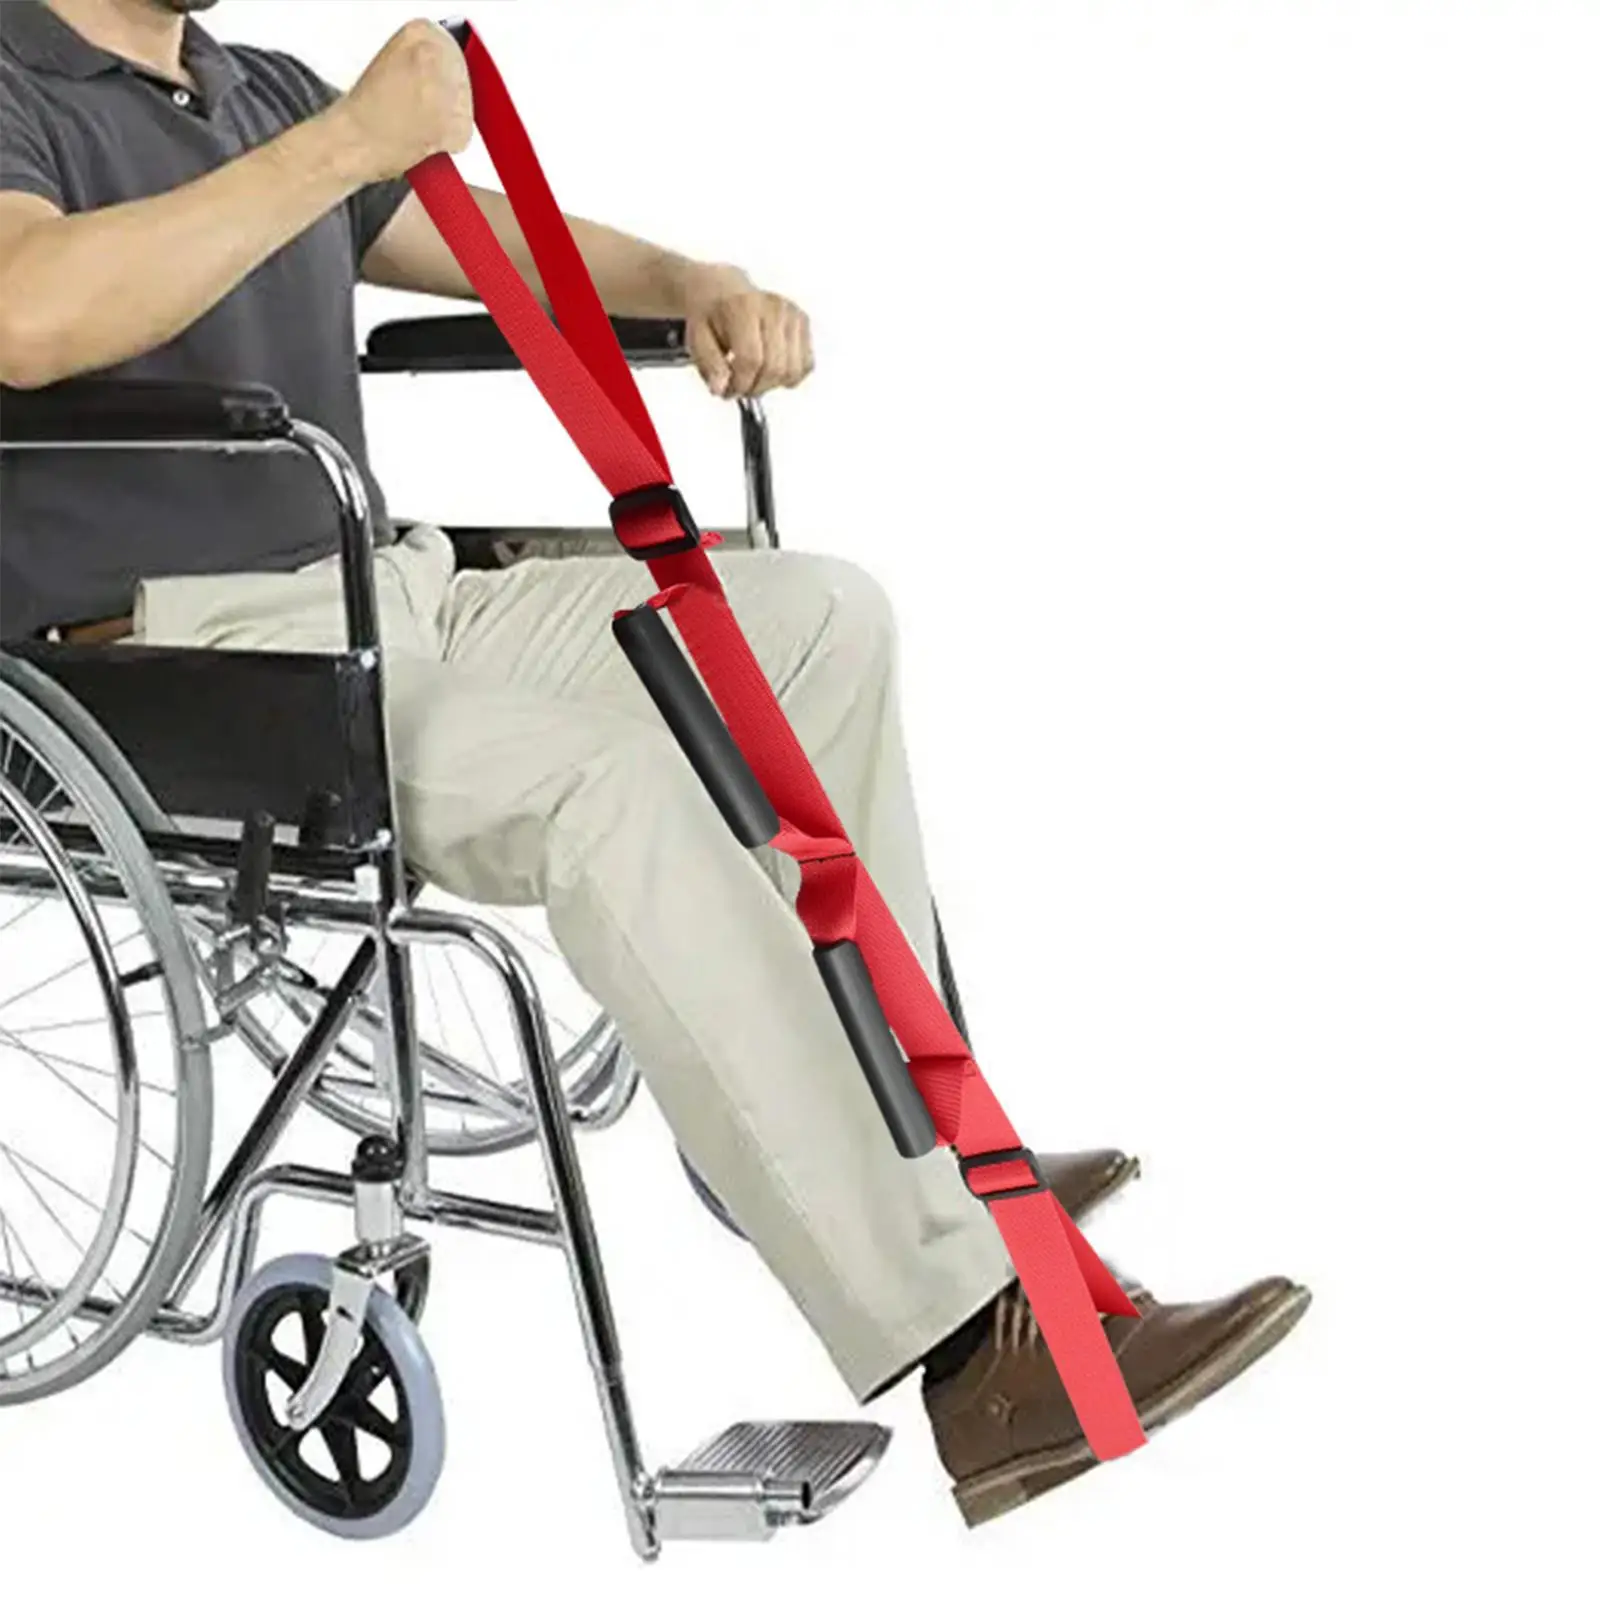 35inch Long Leg Lifter Strap Leg Lifter Assist Durable Adjustable Portable Foot Loop for Elderly People with Limiting Mobility